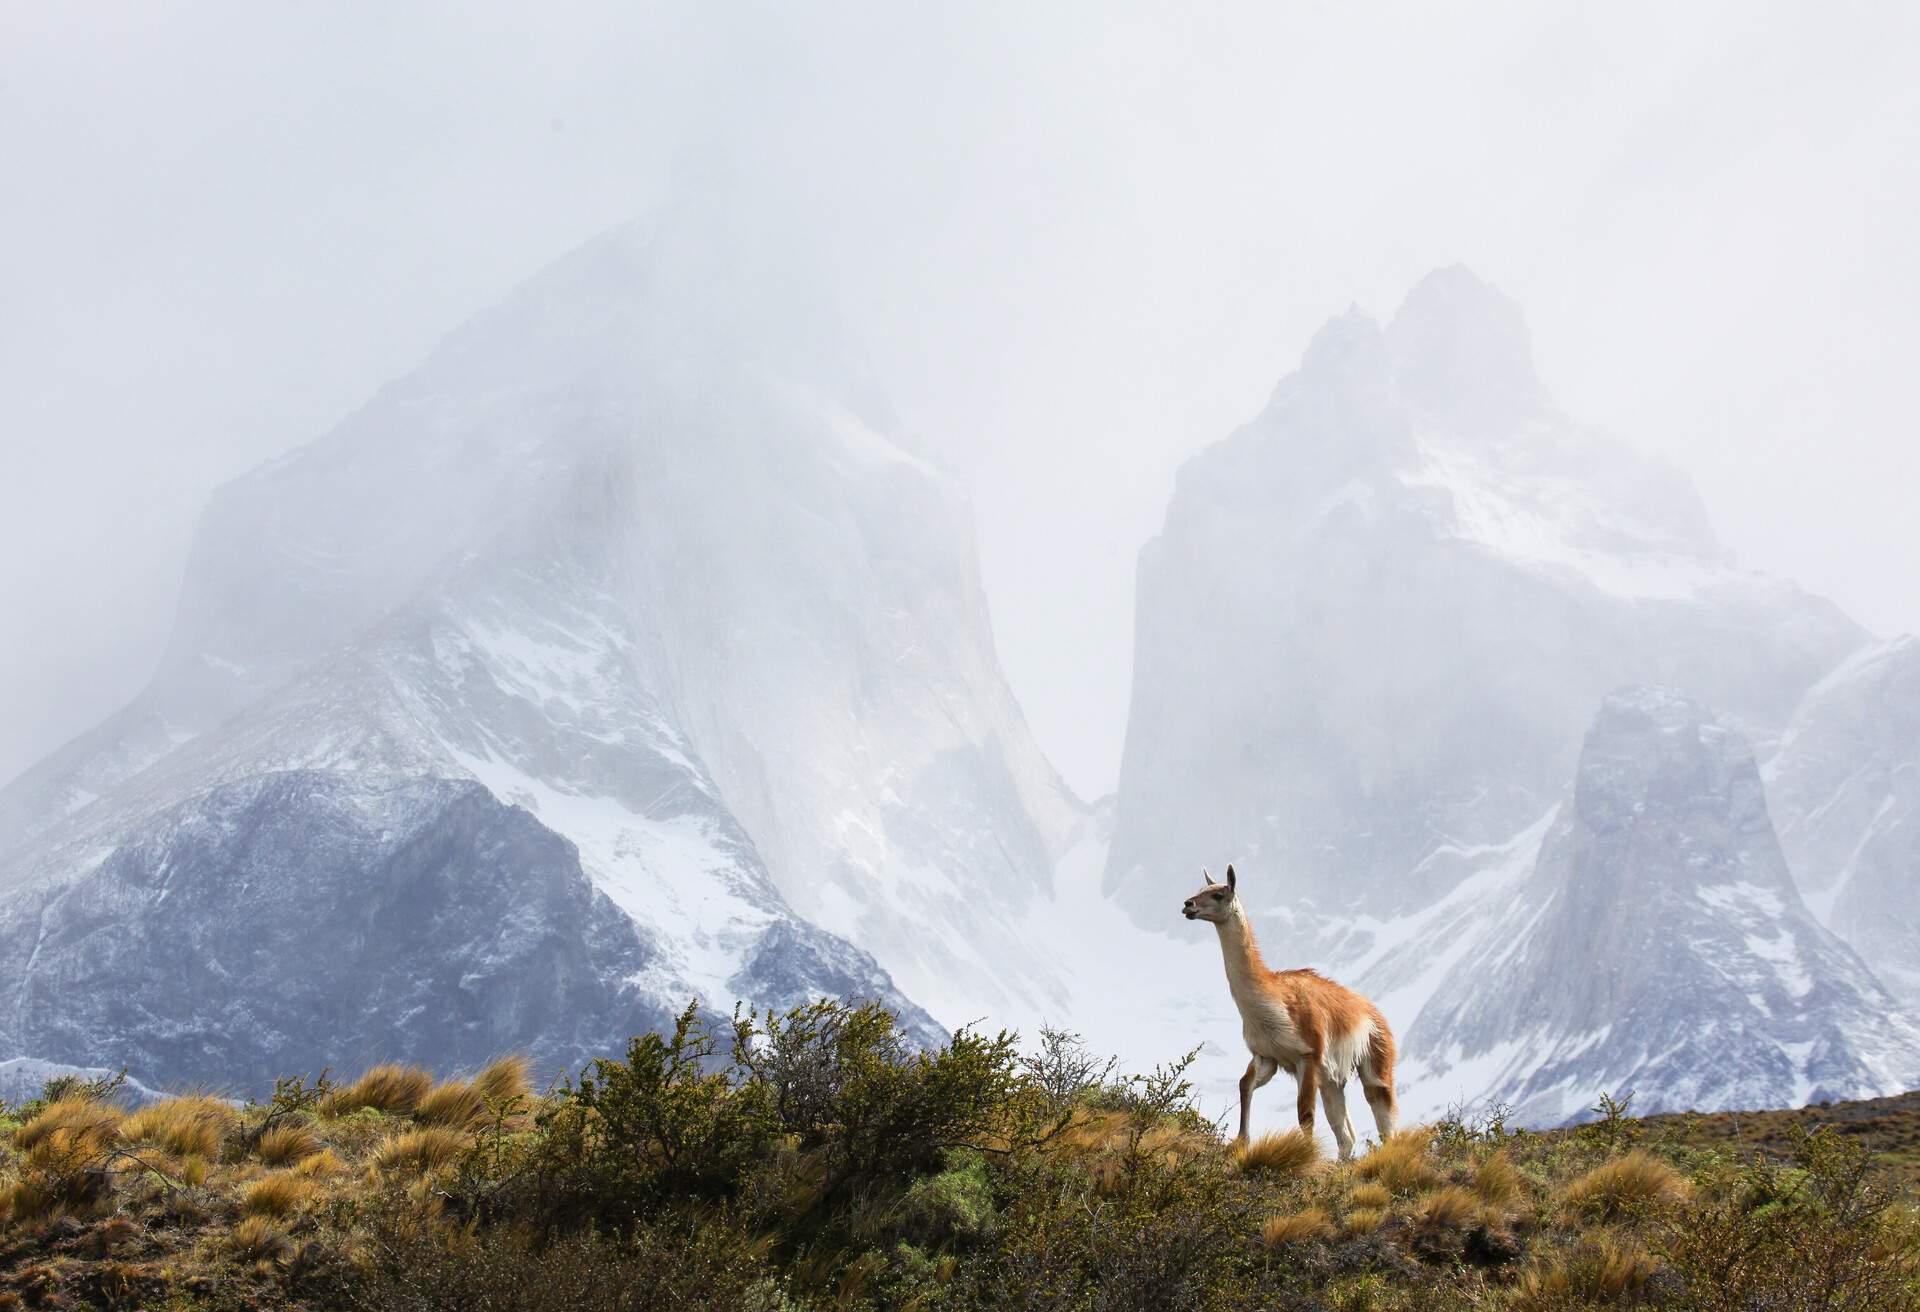 DEST_CHILE_PATAGONIA_TORRES-DEL-PAINE-NATIONAL-PARK_GettyImages-478007257